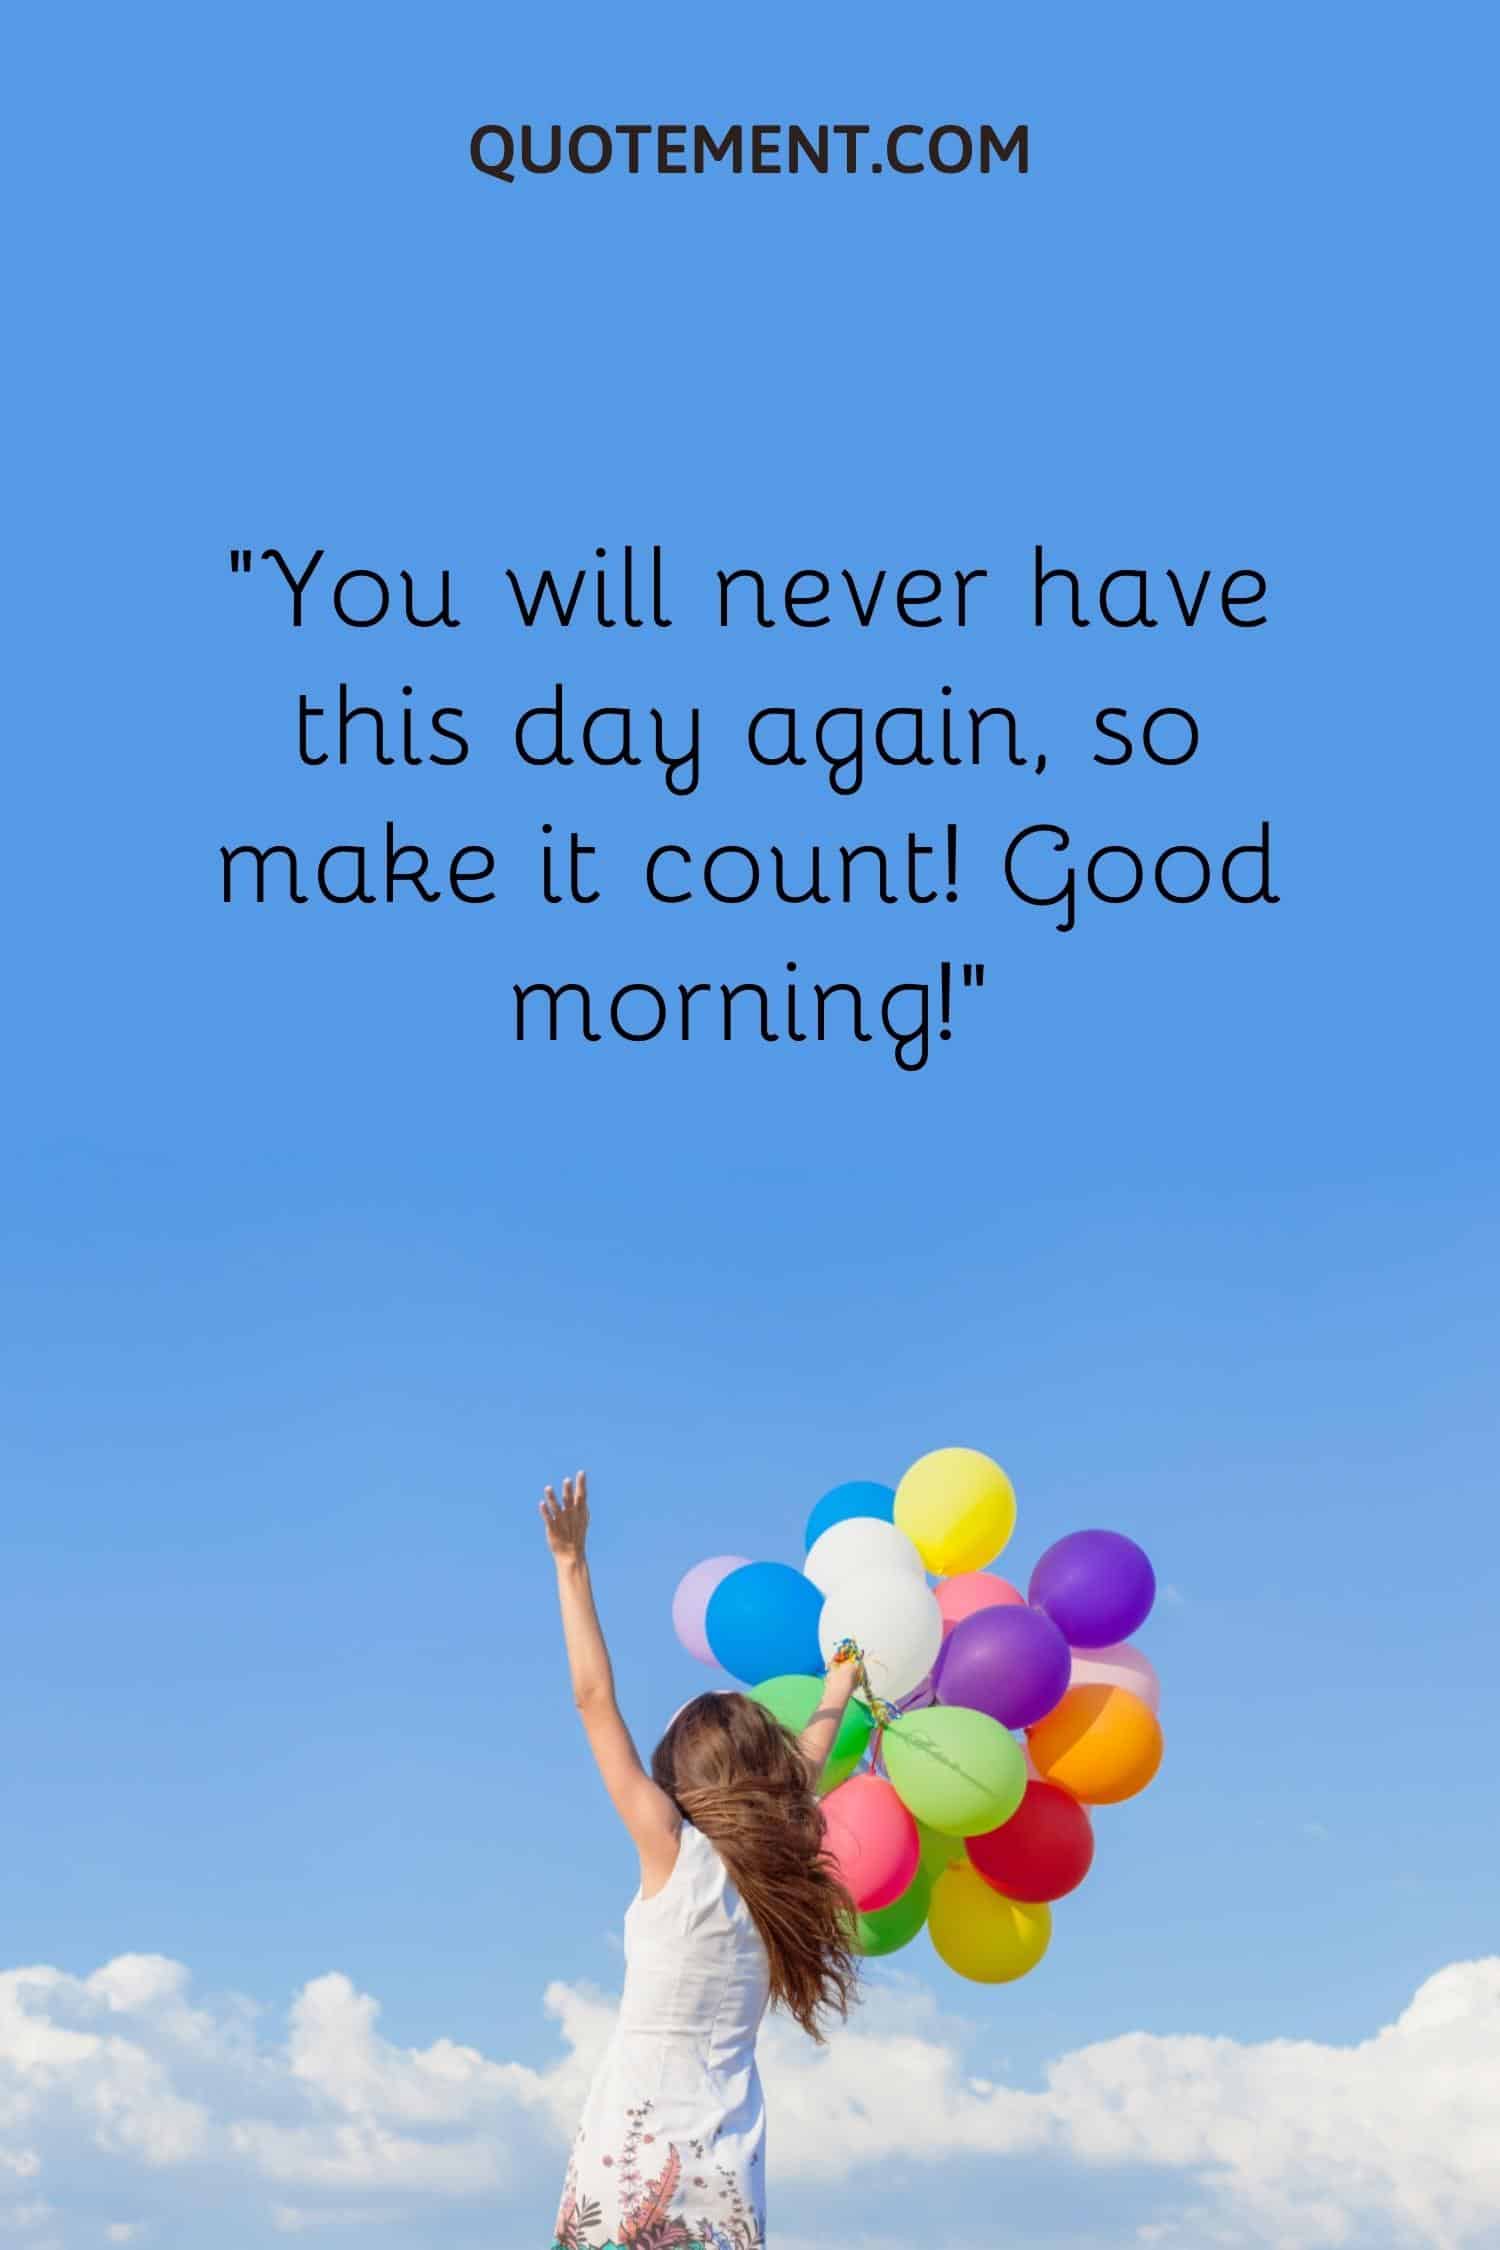 You will never have this day again, so make it count! Good morning